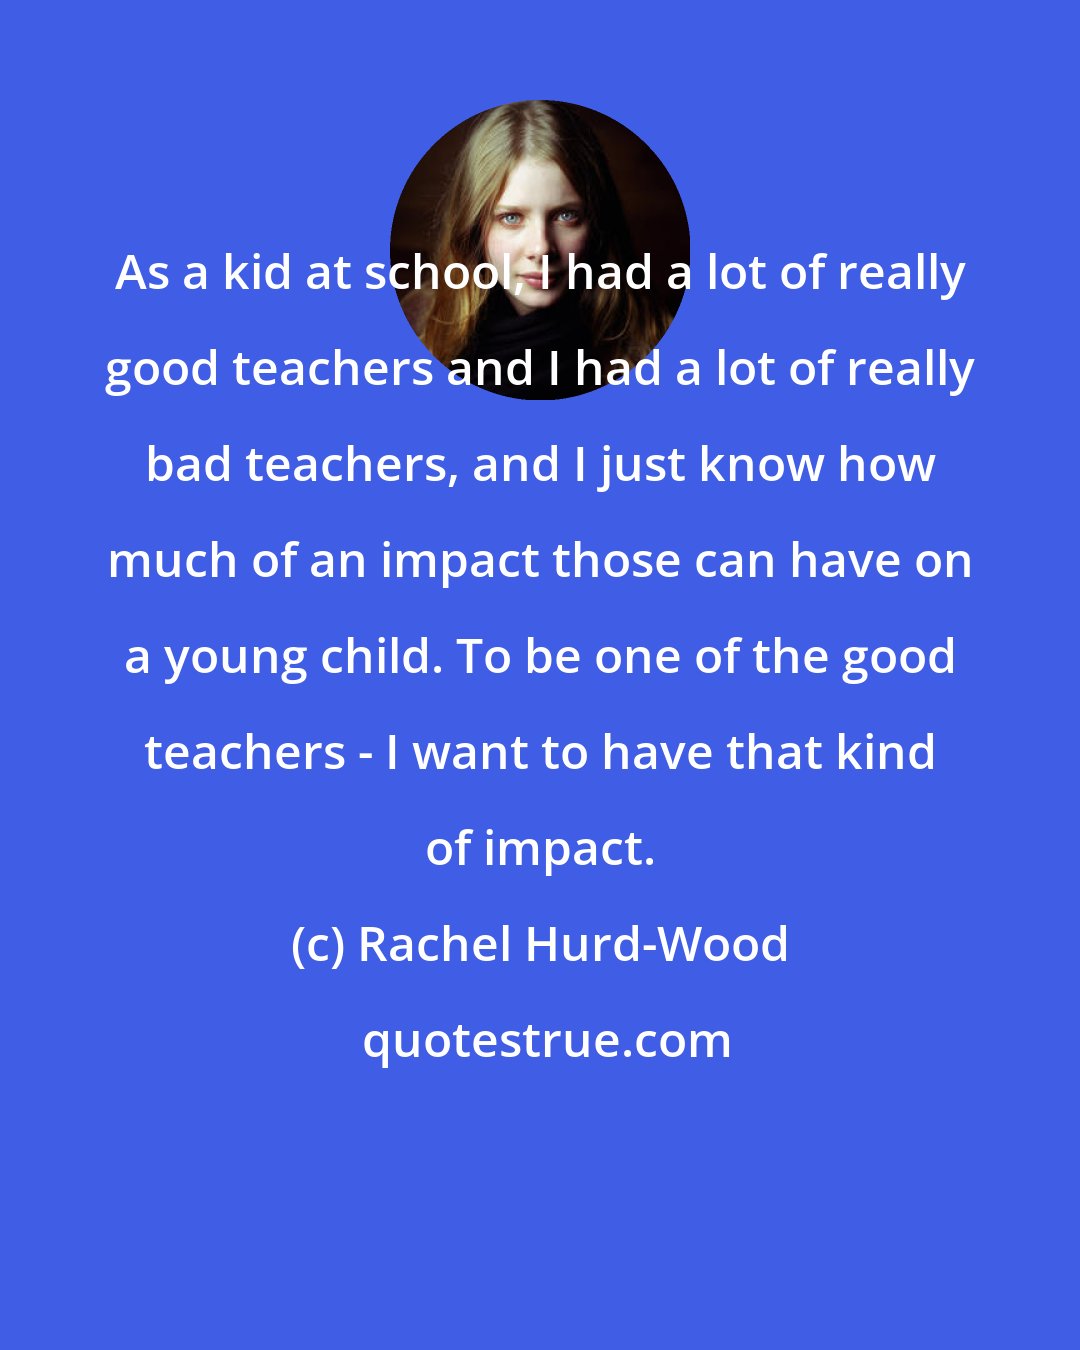 Rachel Hurd-Wood: As a kid at school, I had a lot of really good teachers and I had a lot of really bad teachers, and I just know how much of an impact those can have on a young child. To be one of the good teachers - I want to have that kind of impact.